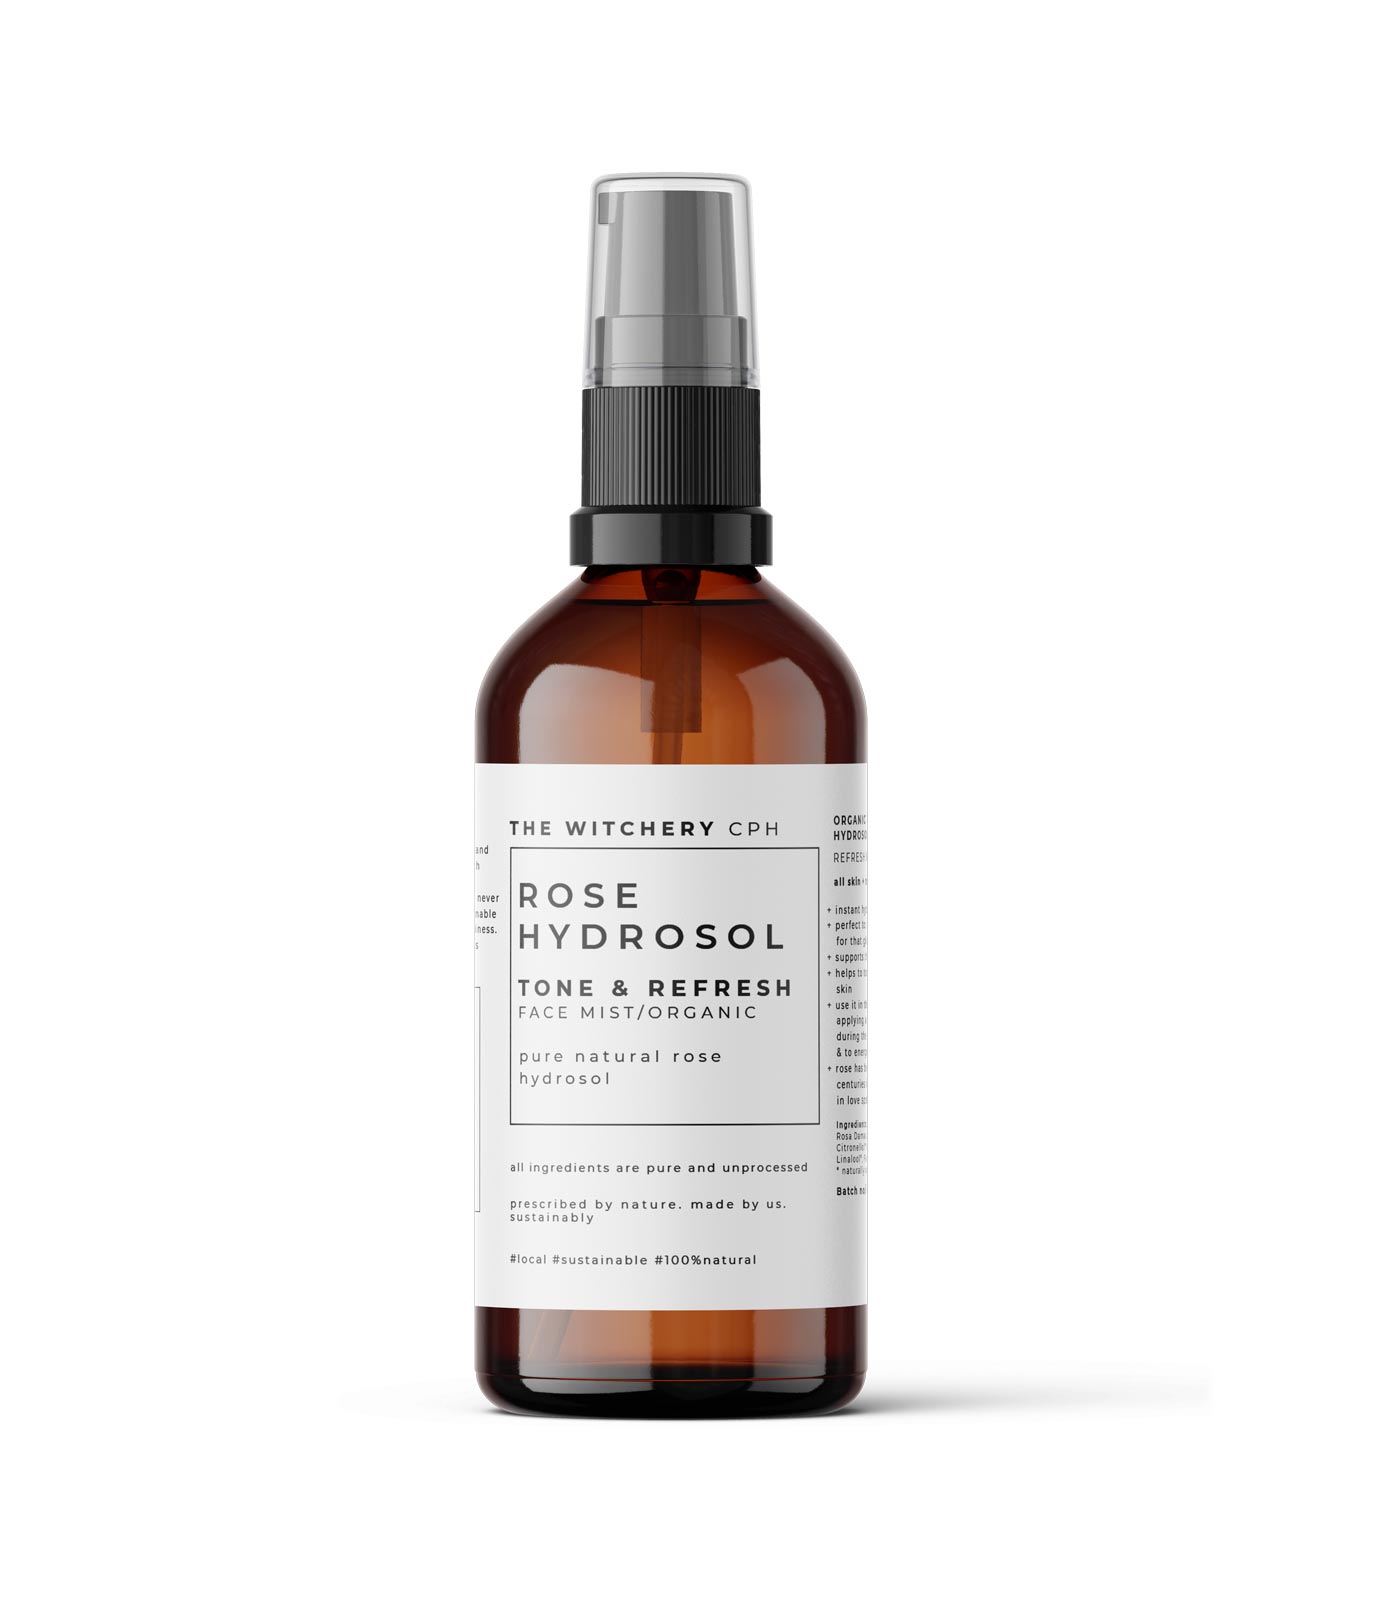 Ros Hydrosol : The Witchery CPH